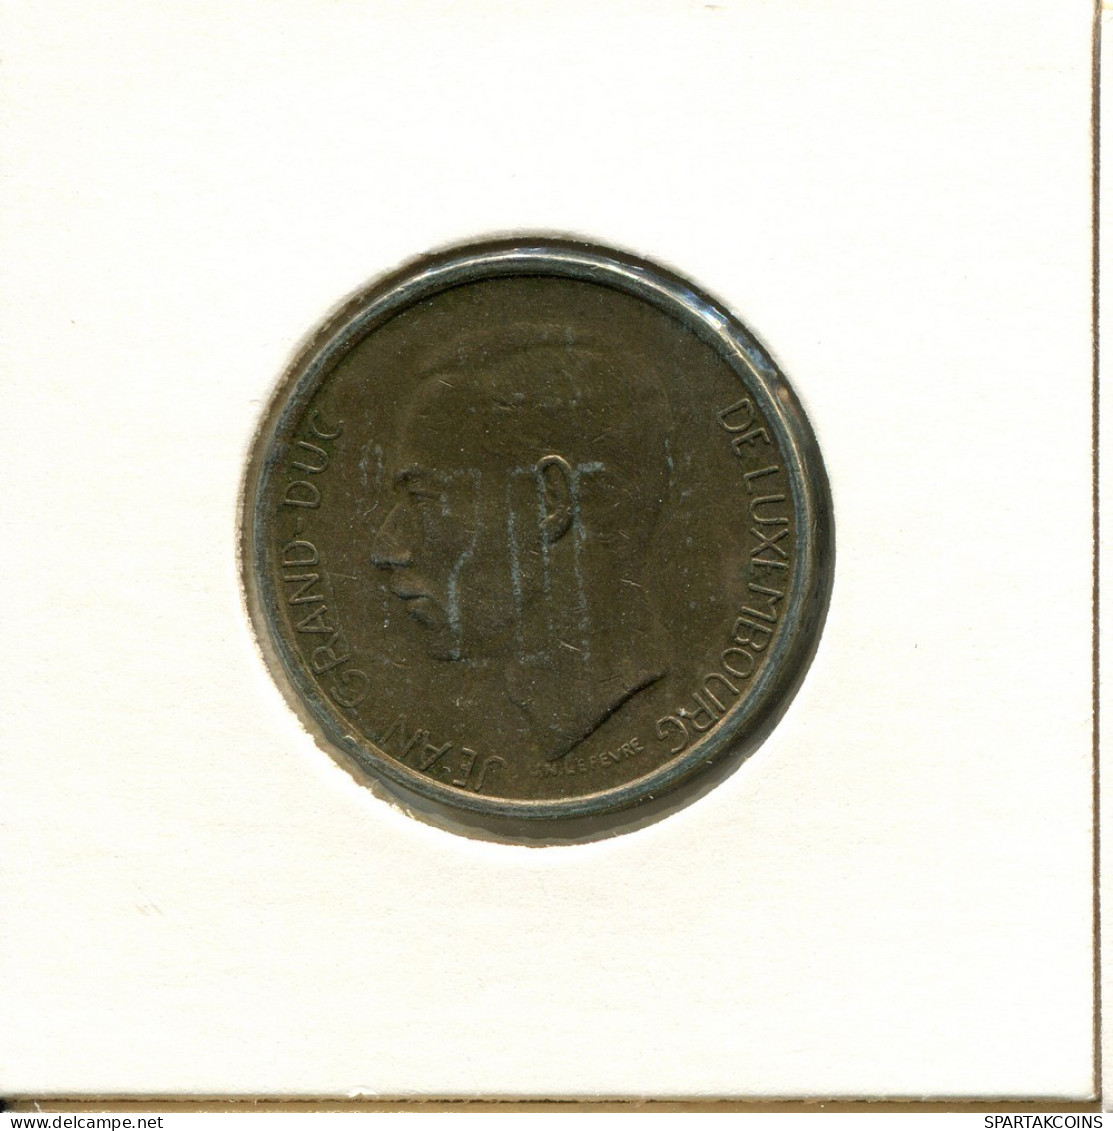 20 FRANCS 1982 LUXEMBURG LUXEMBOURG Münze #BA050.D.A - Luxembourg